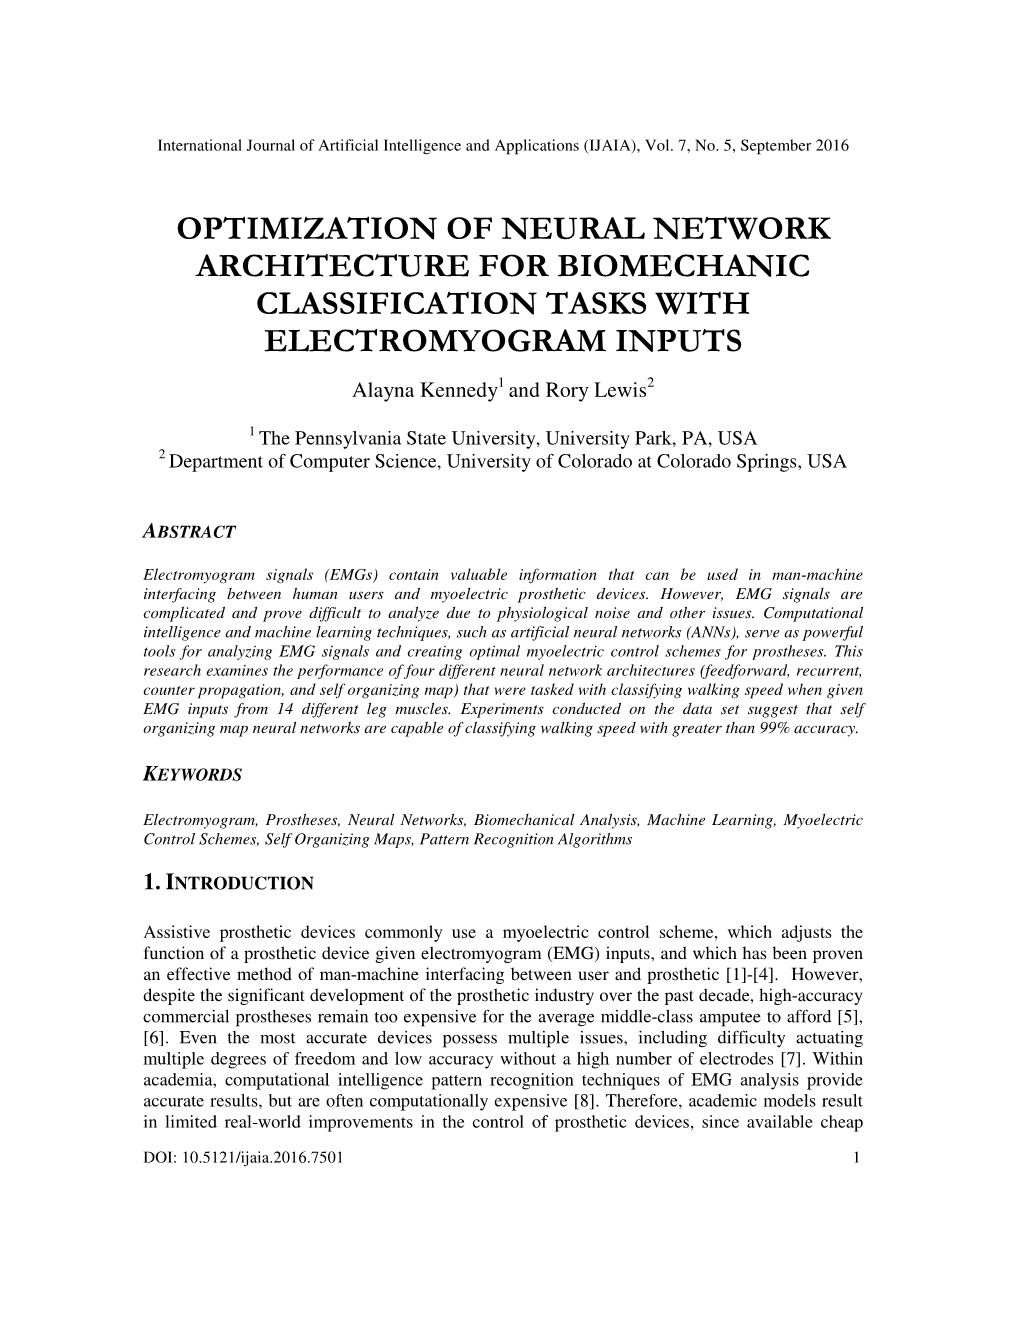 Optimization of Neural Network Architecture for Biomechanic Classification Tasks with Electromyogram Inputs